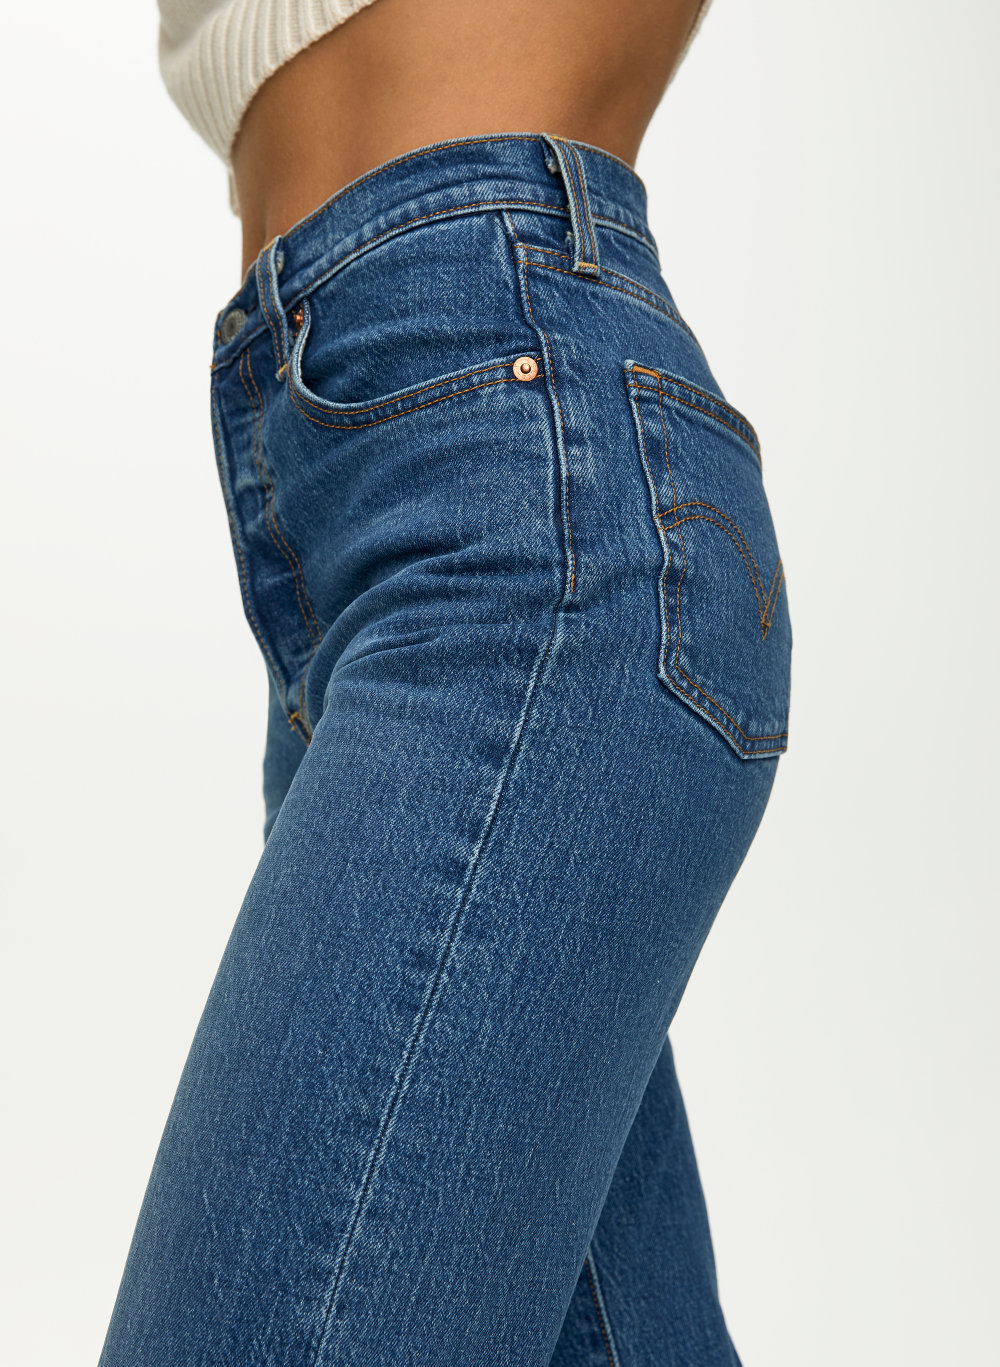 ribcage high rise jeans